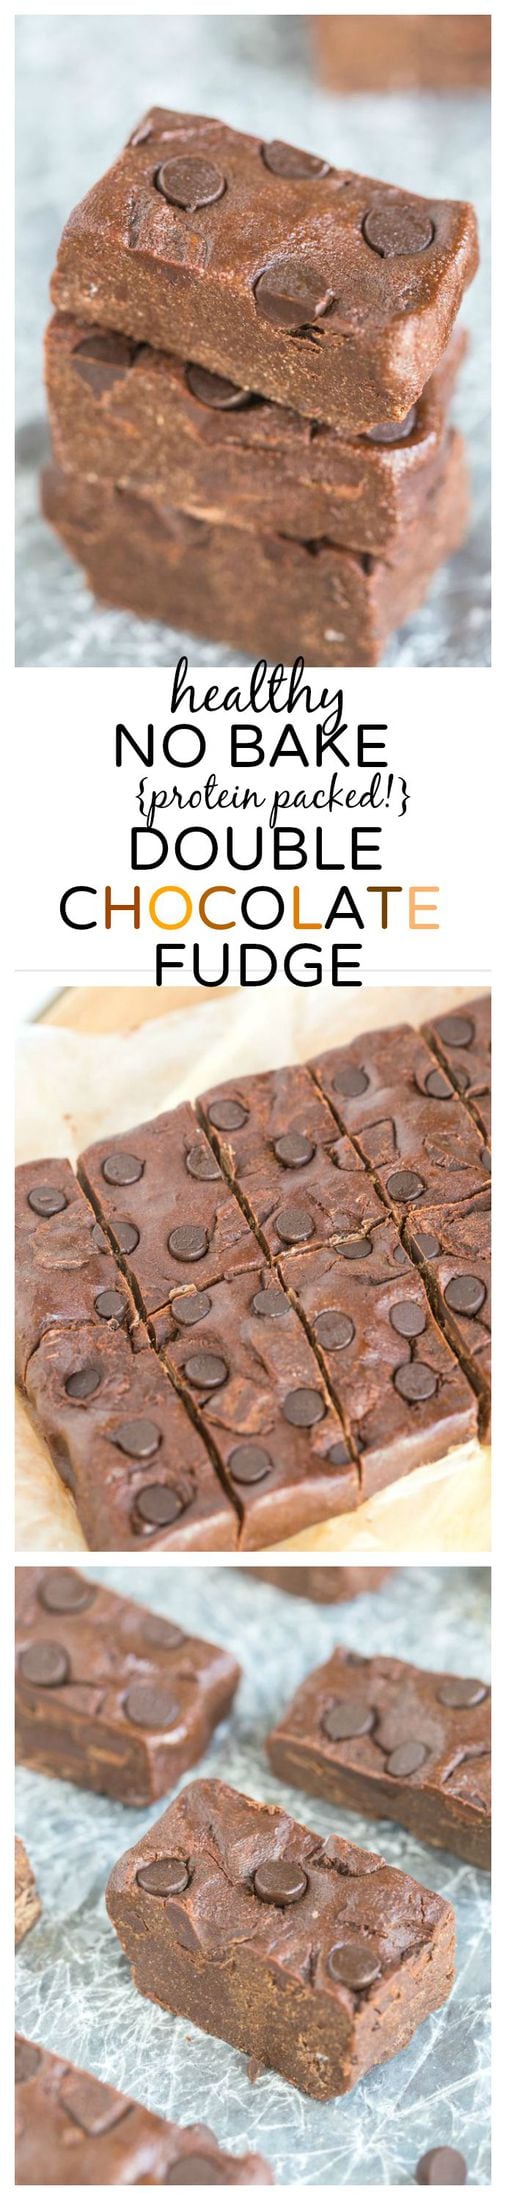 Healthy No Bake Double Chocolate Fudge- A delicious dessert or snack- naturally gluten free, there's a vegan, paleo and high protein option! 